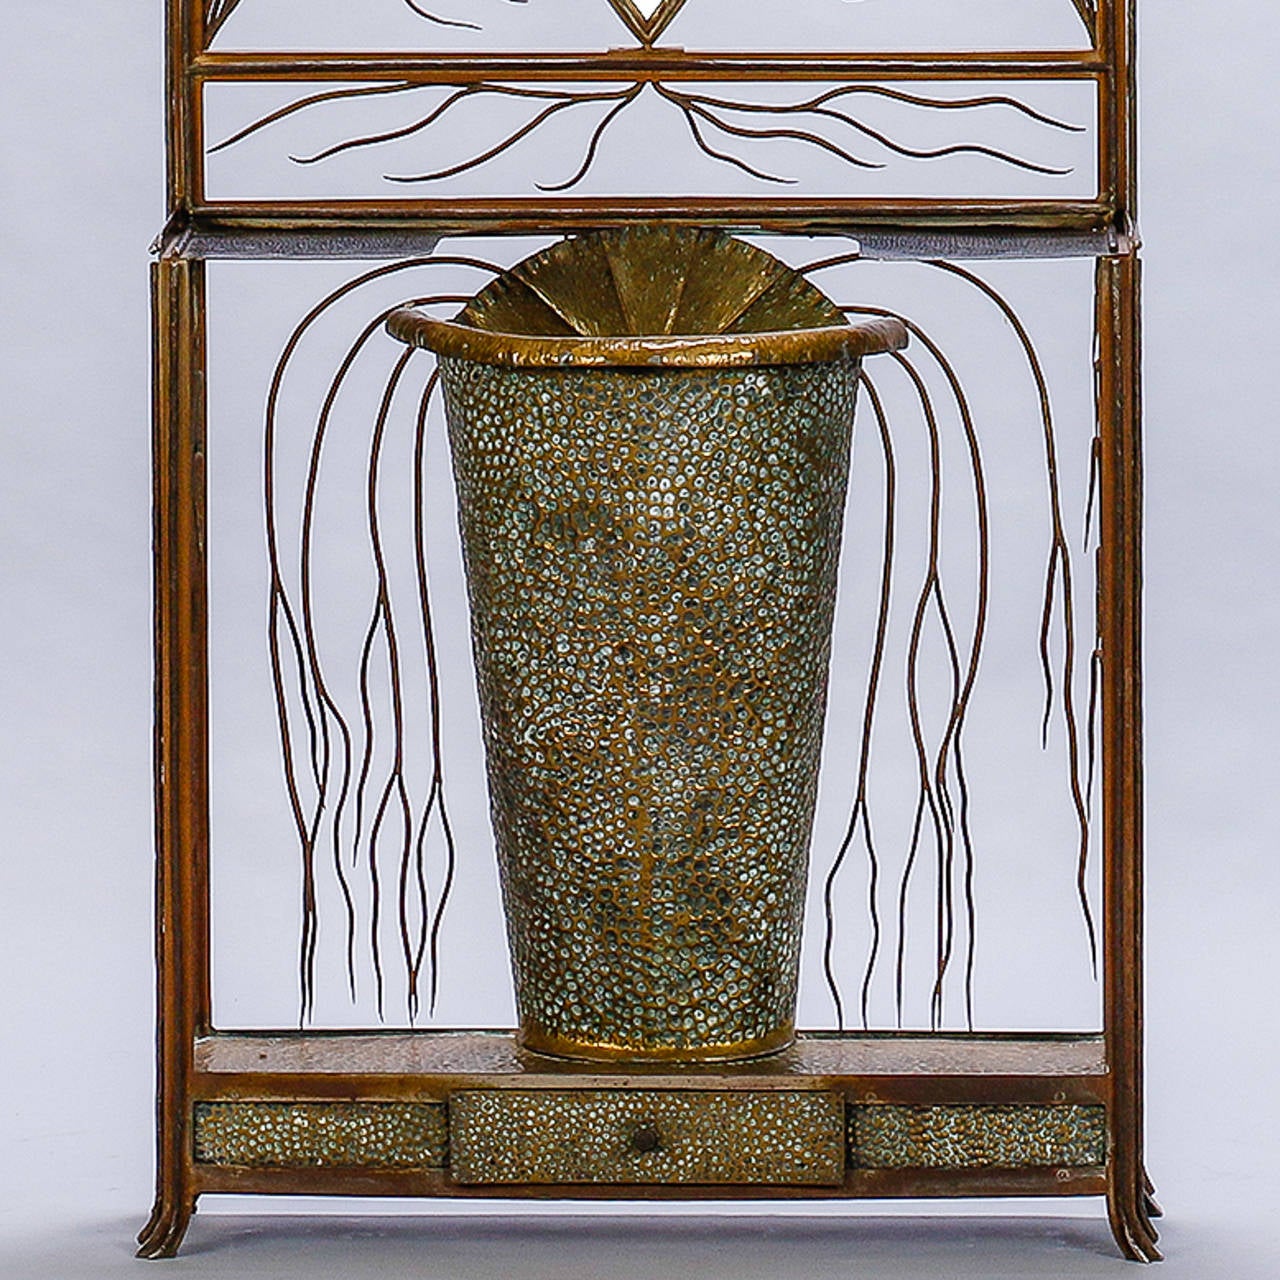 Found in France, this Art Deco era hall tree and umbrella stand has a sculptural quality with hammered brass and decorative, detailed work with slender, curved strands forming a crest and framing the beveled ovoid mirror and umbrella holder.